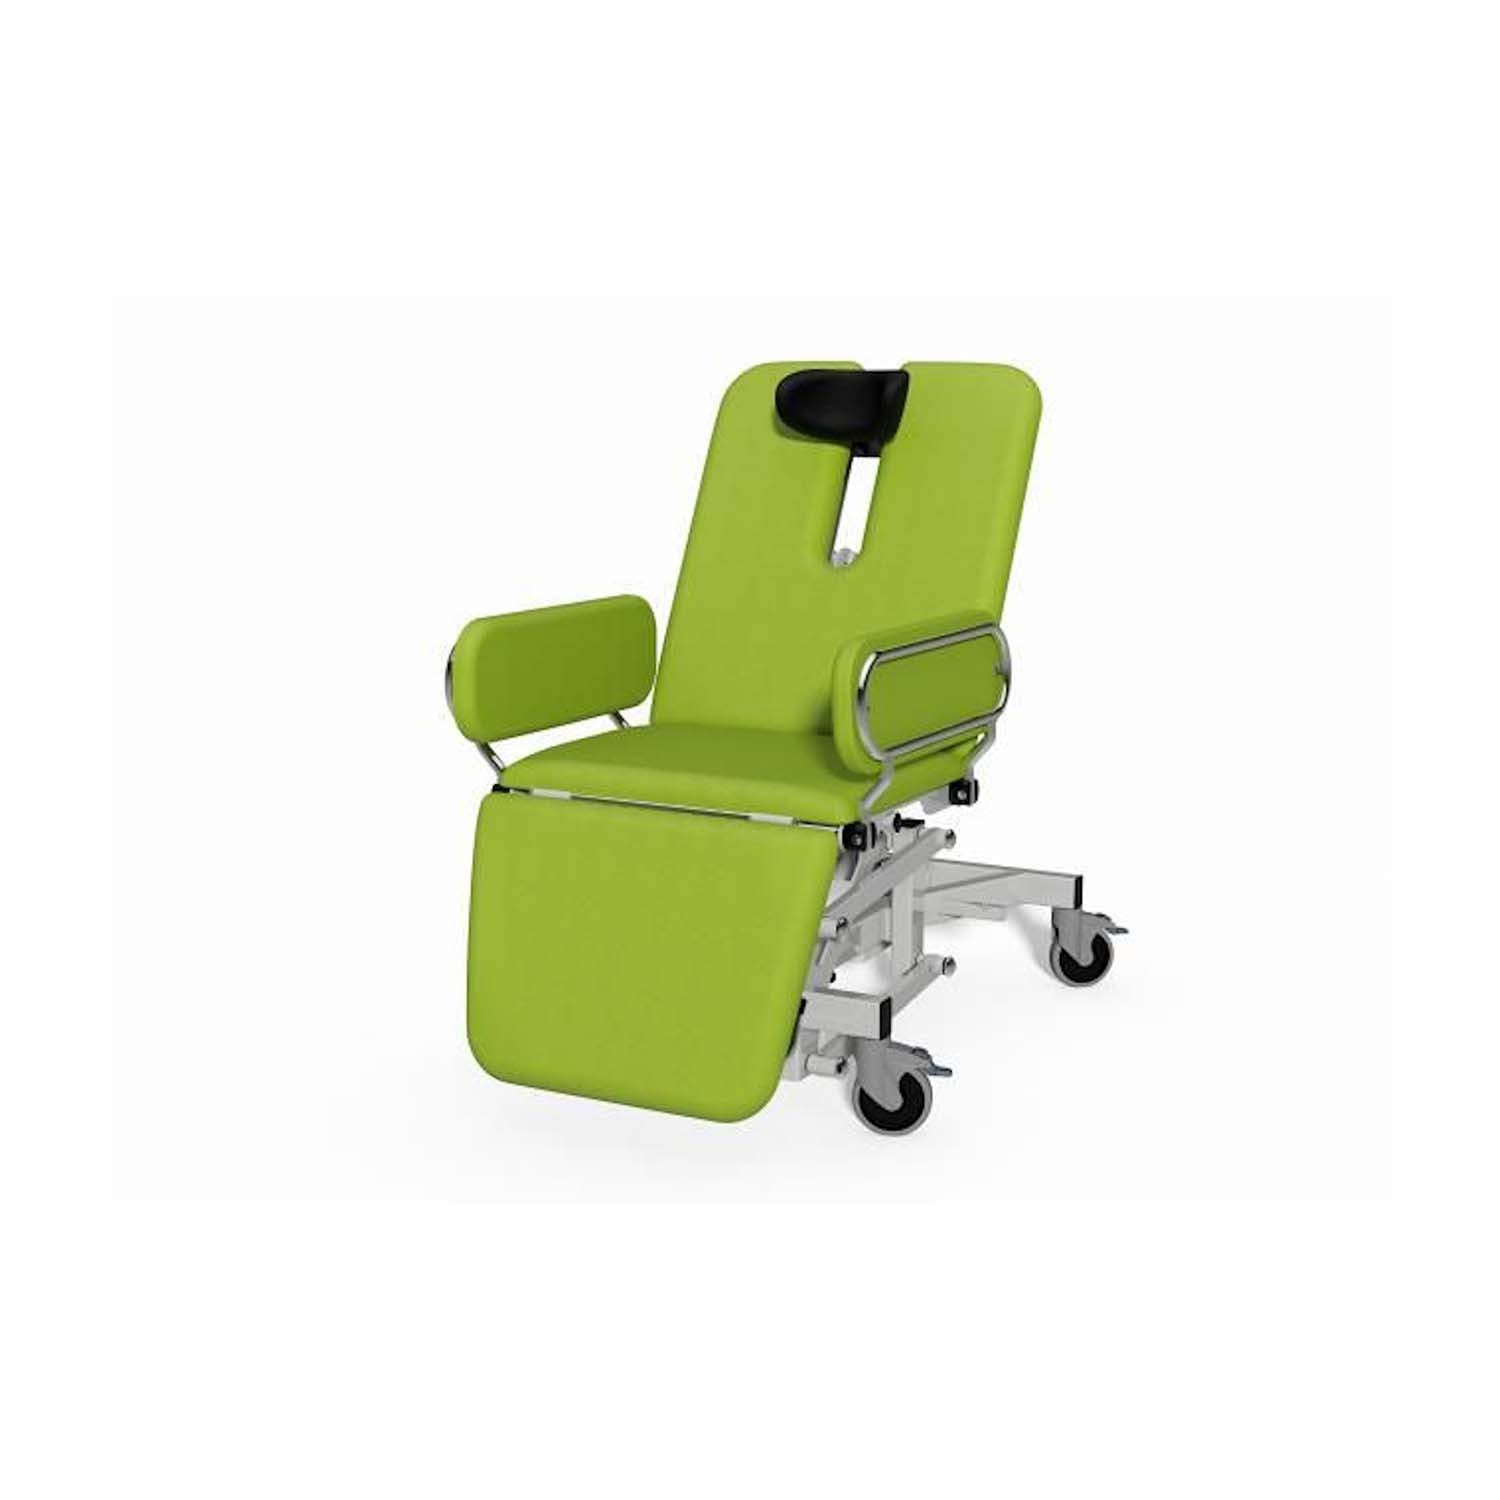 Plinth 2000 Model 93O Ophthalmology Couch | Citrus Green